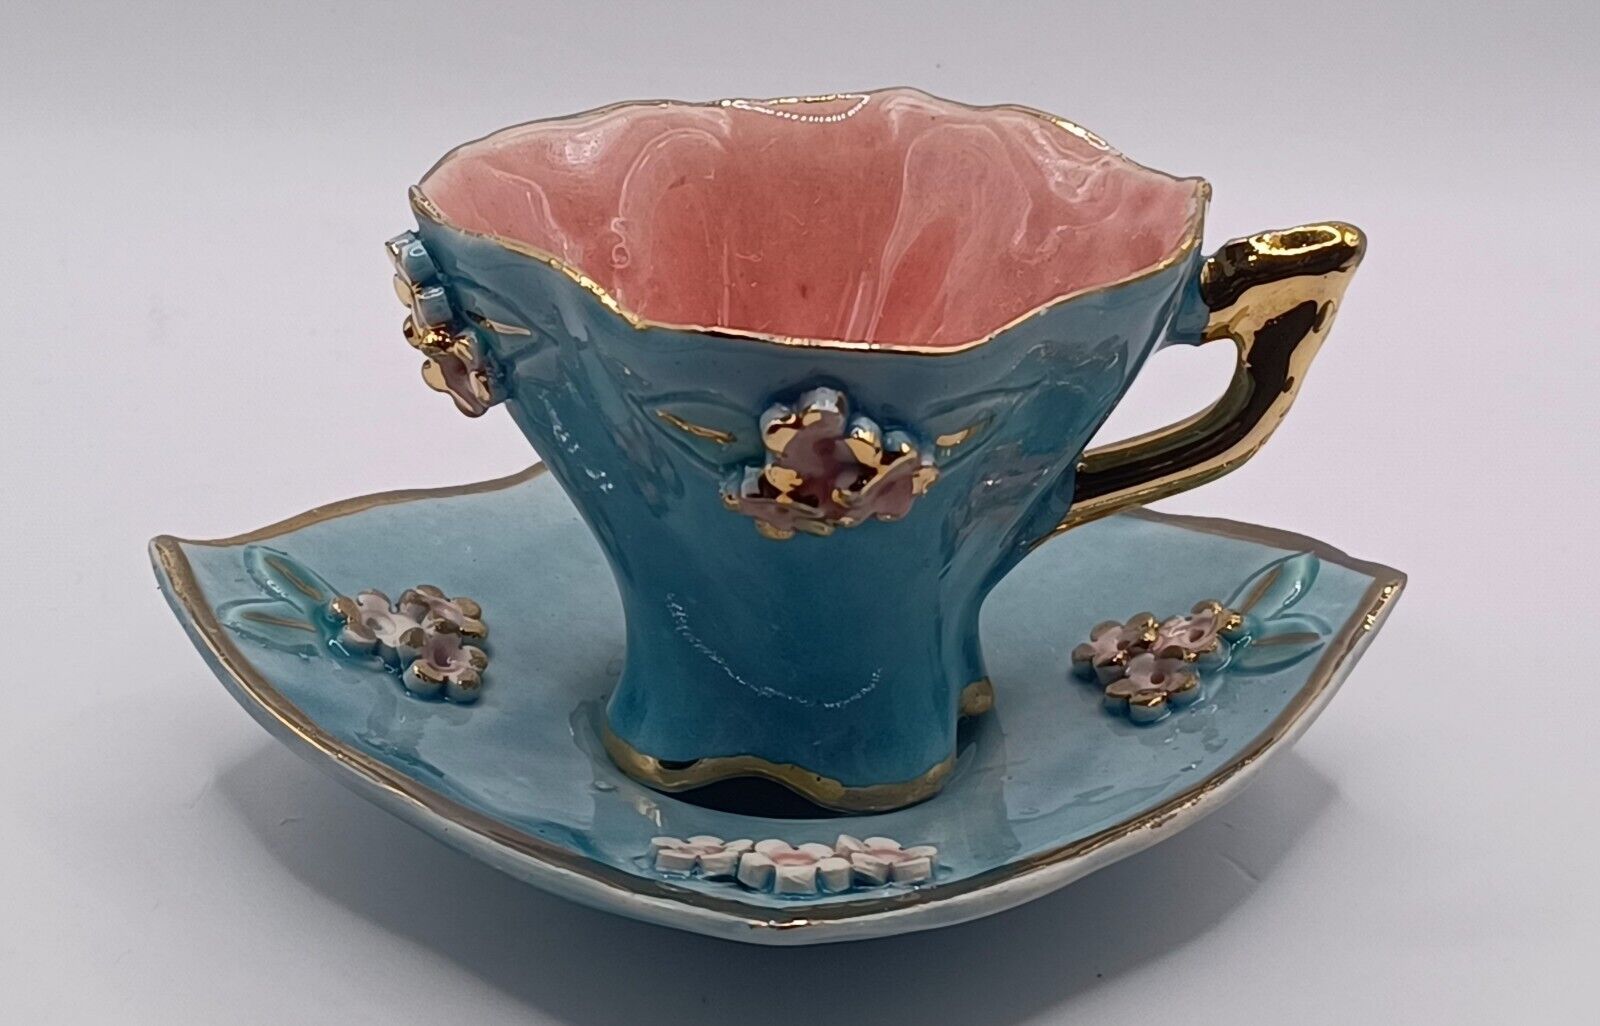 Vintage Dainty Ornate 3 Dimensional Flowers Turquoise Pink Lil' Cup & Saucer Set